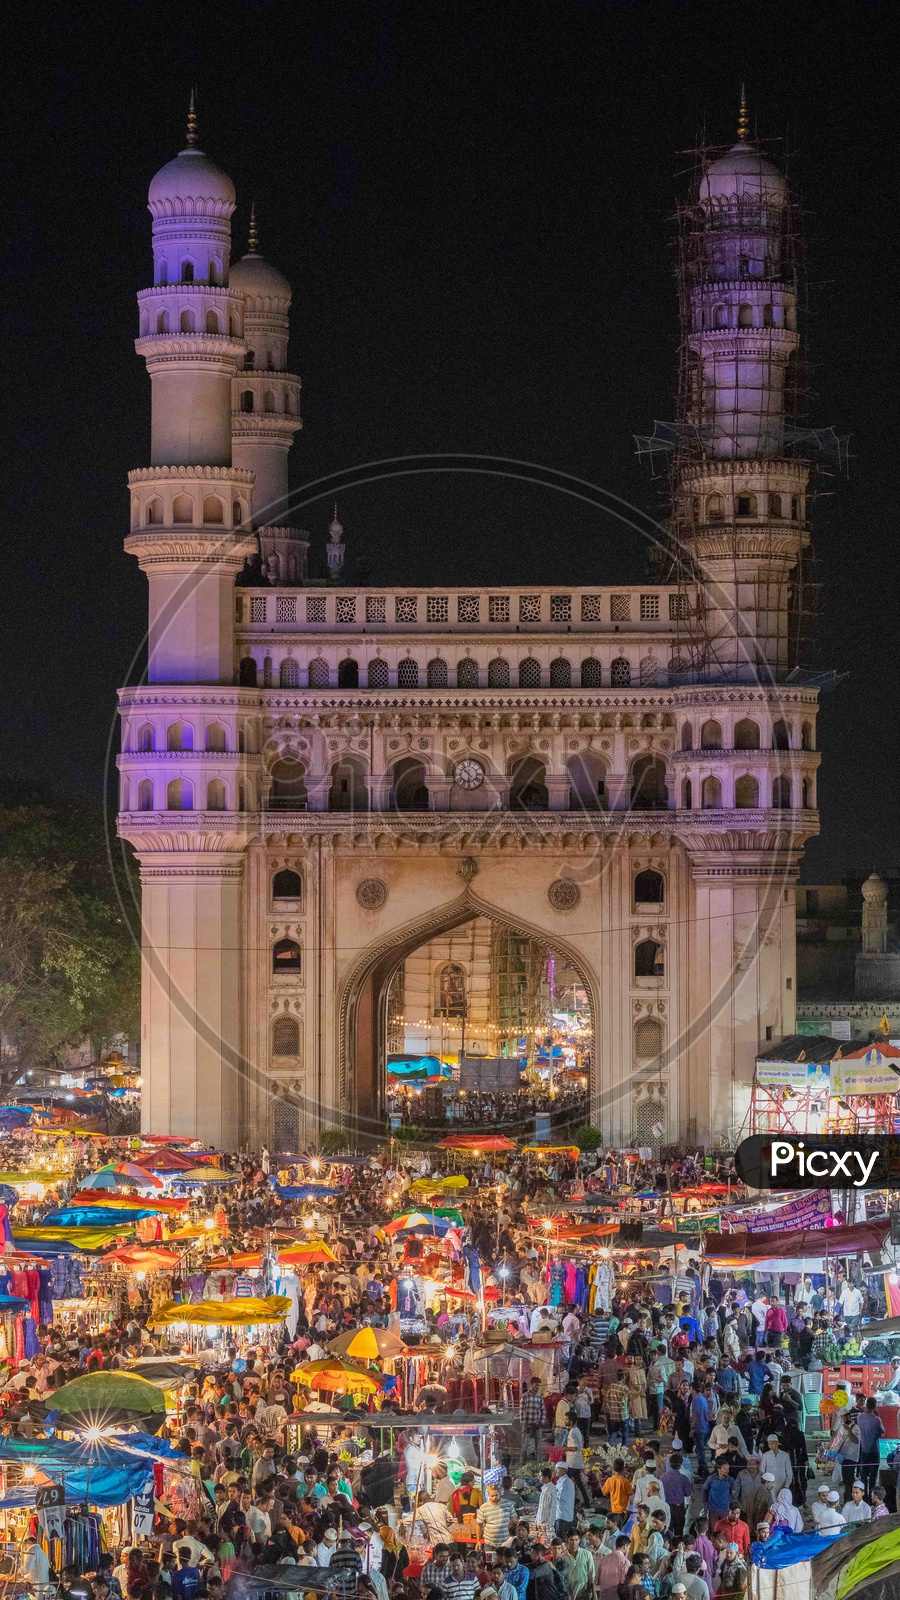 Crowd in street bazaar during night with Charminar in background